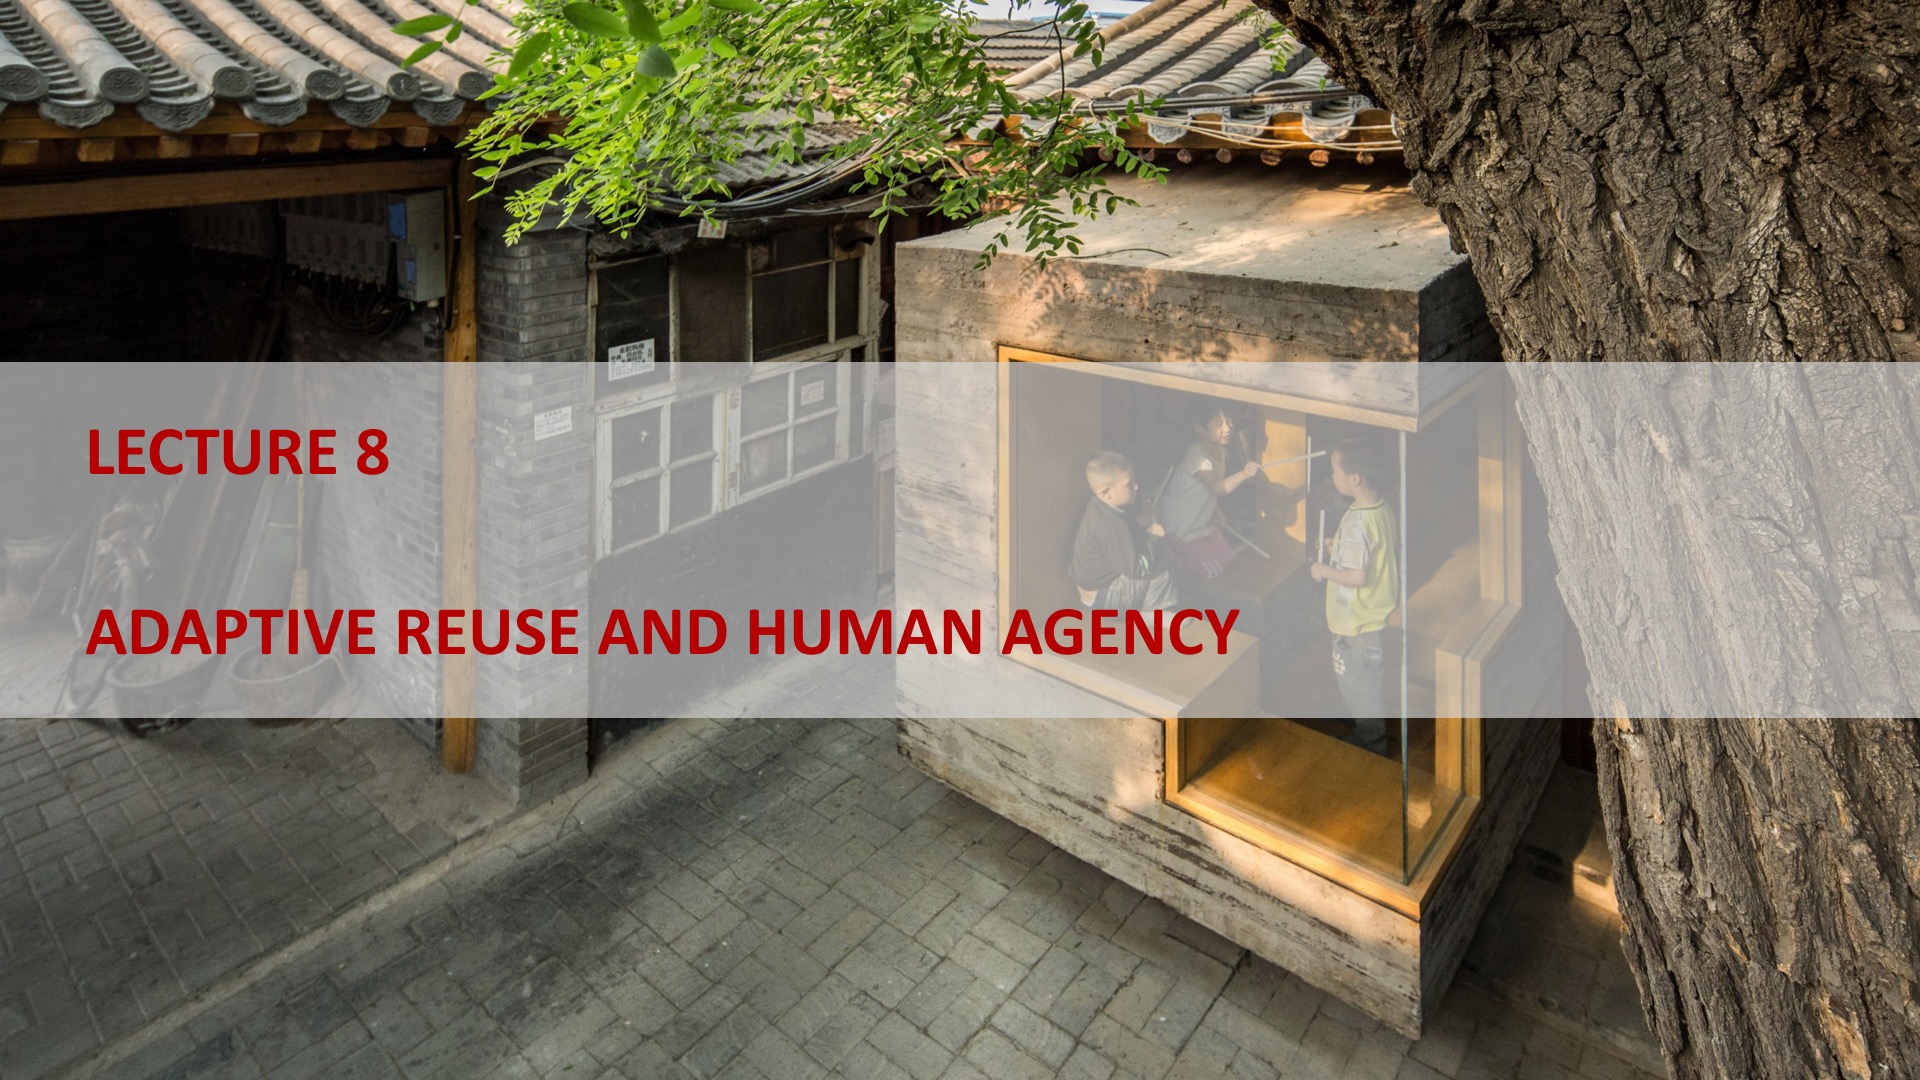 Lecture 8: Adaptive Reuse and Human Agency